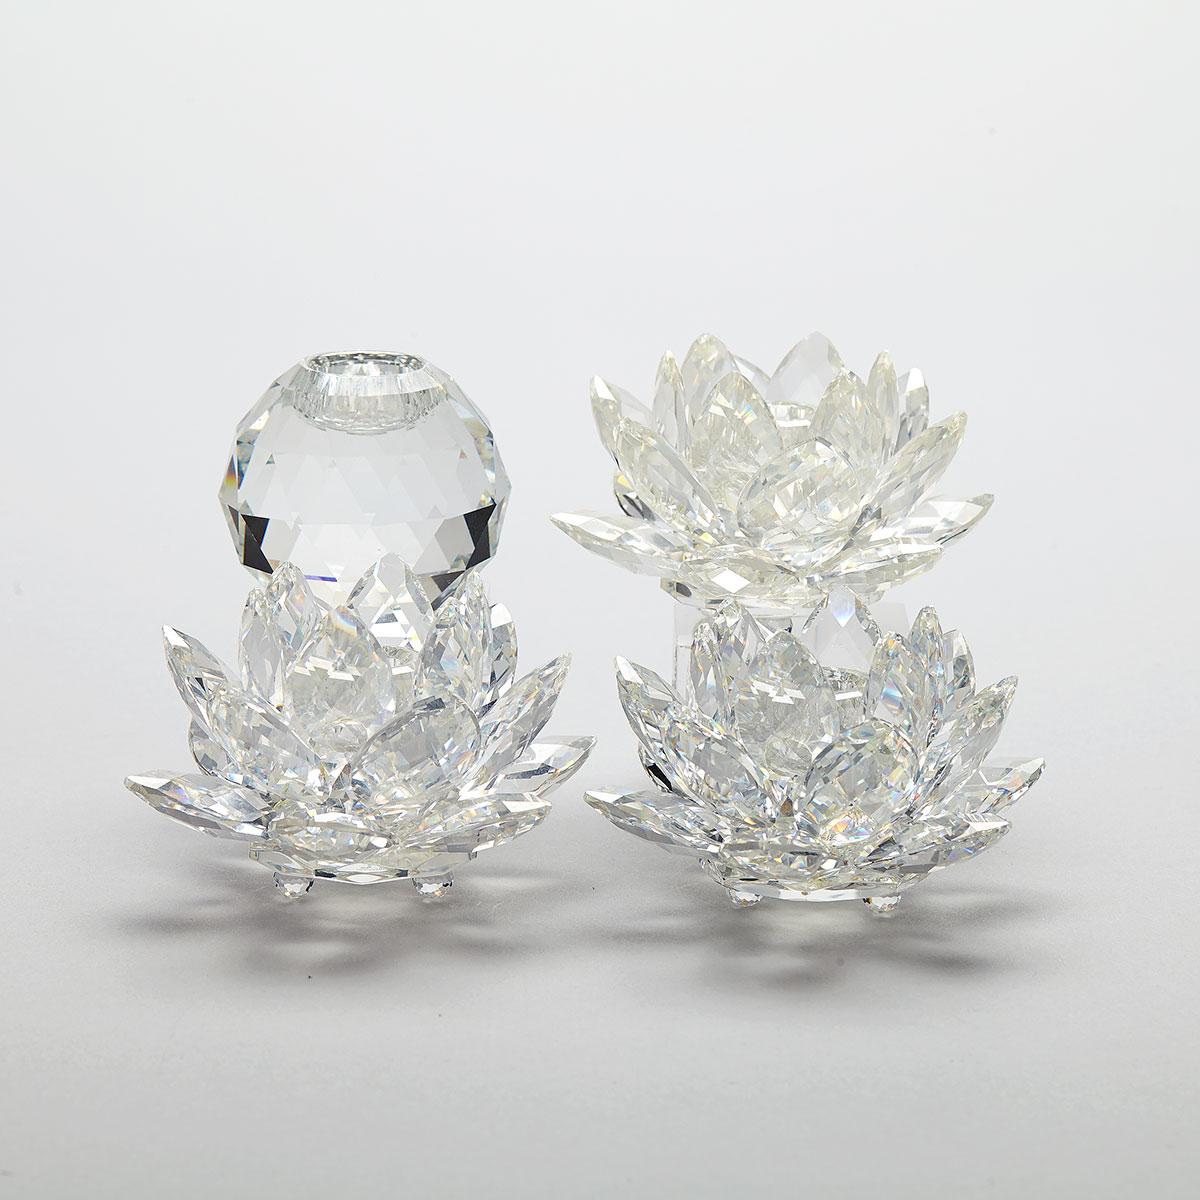 Three Swarovski Crystal Waterlily Candleholders and One King Global Candleholder, late 20th century